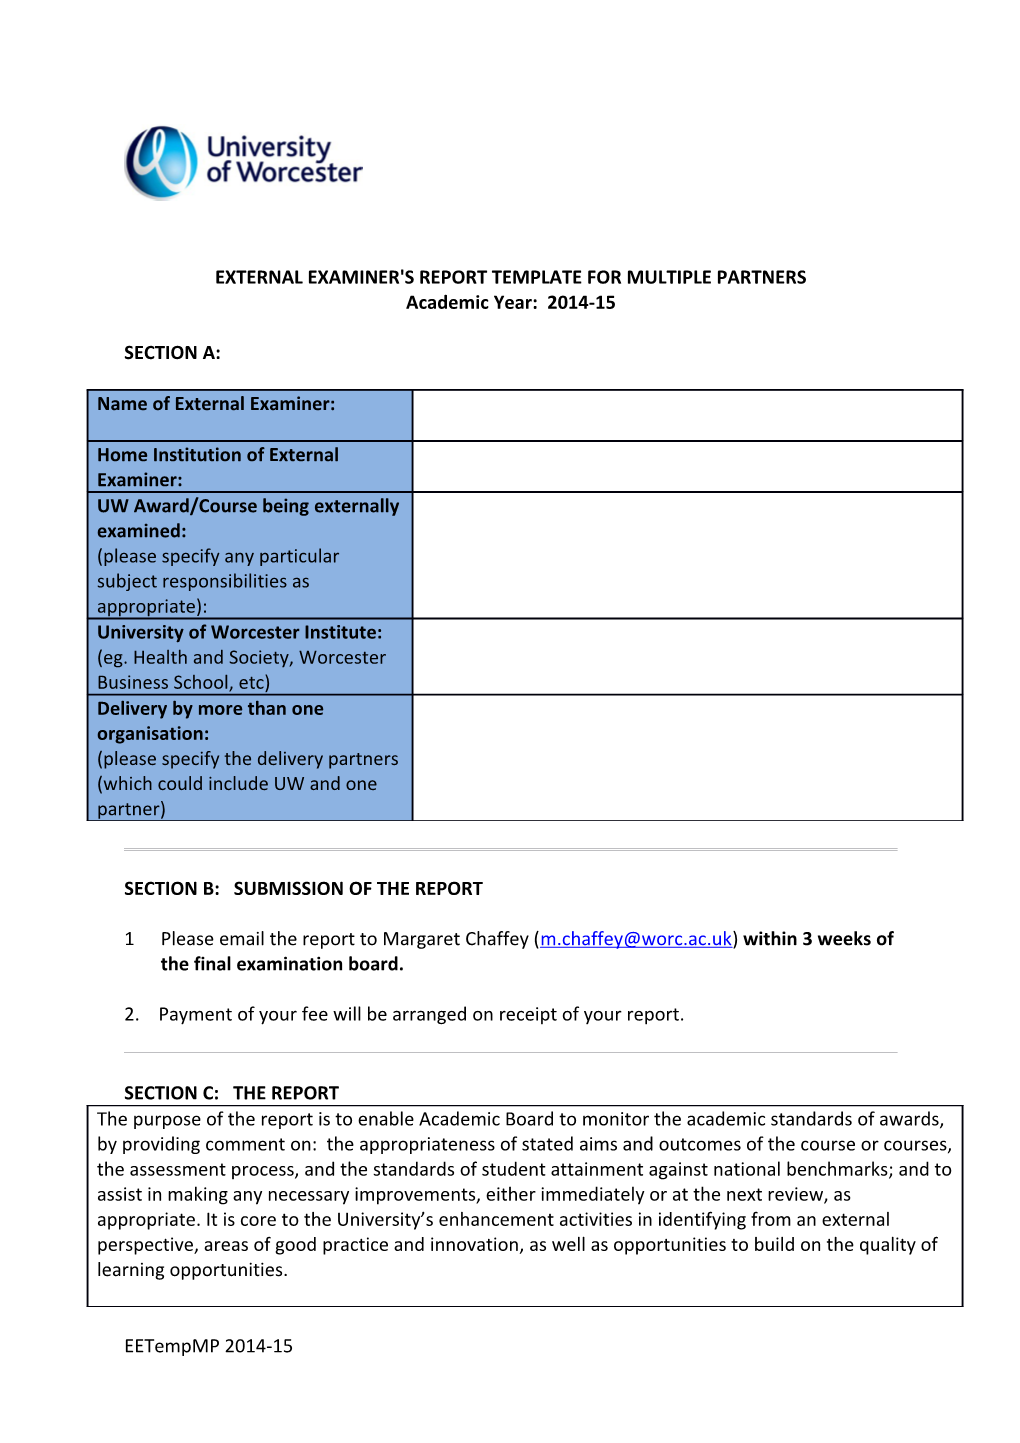 External Examiner's Report Template for Multiple Partners